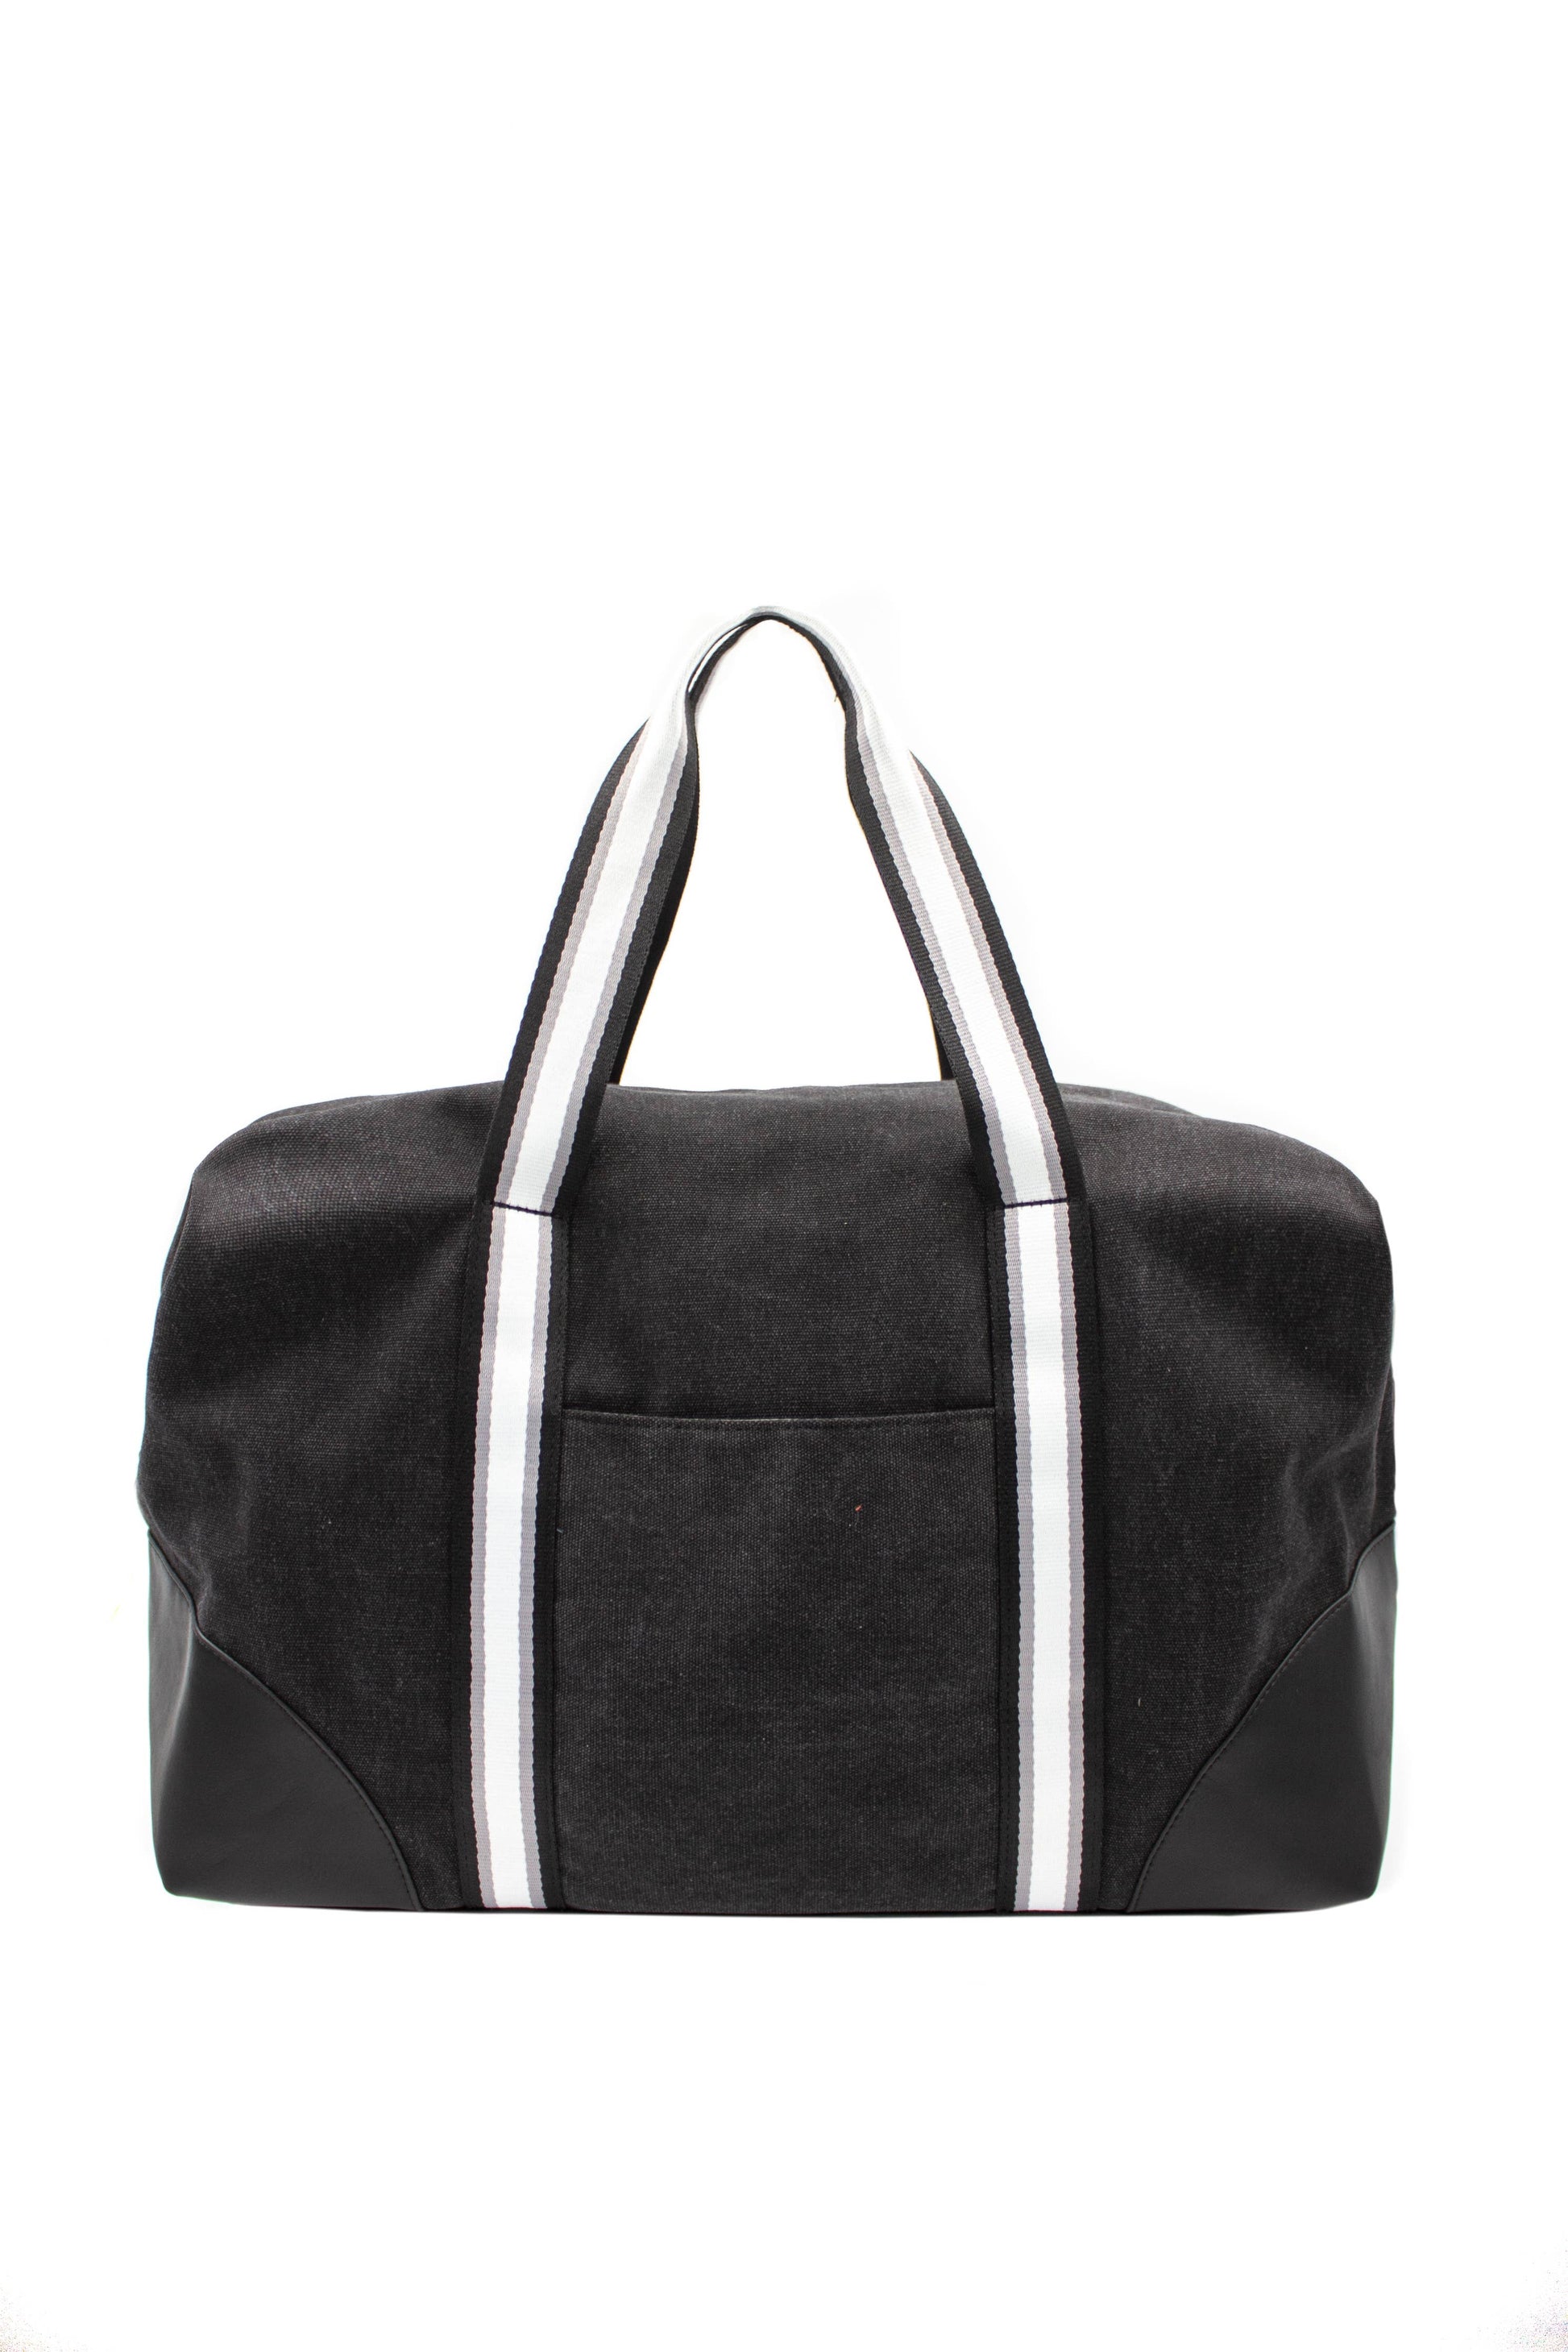 the image shows a black & white duffel bag against a white backdrop